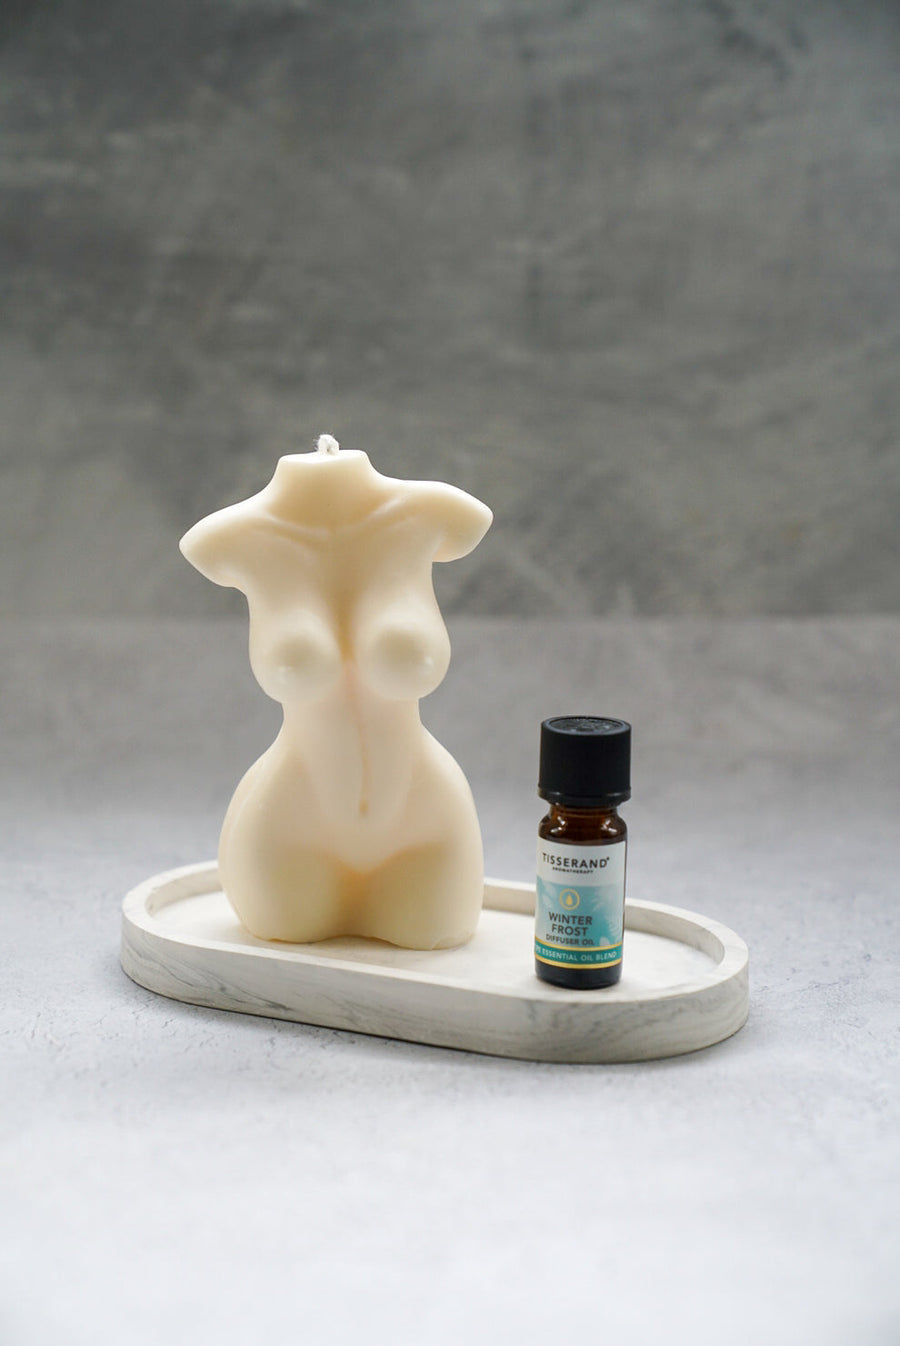 XL Female Torso Candle in Ivory available at Falenafinejewelry.com